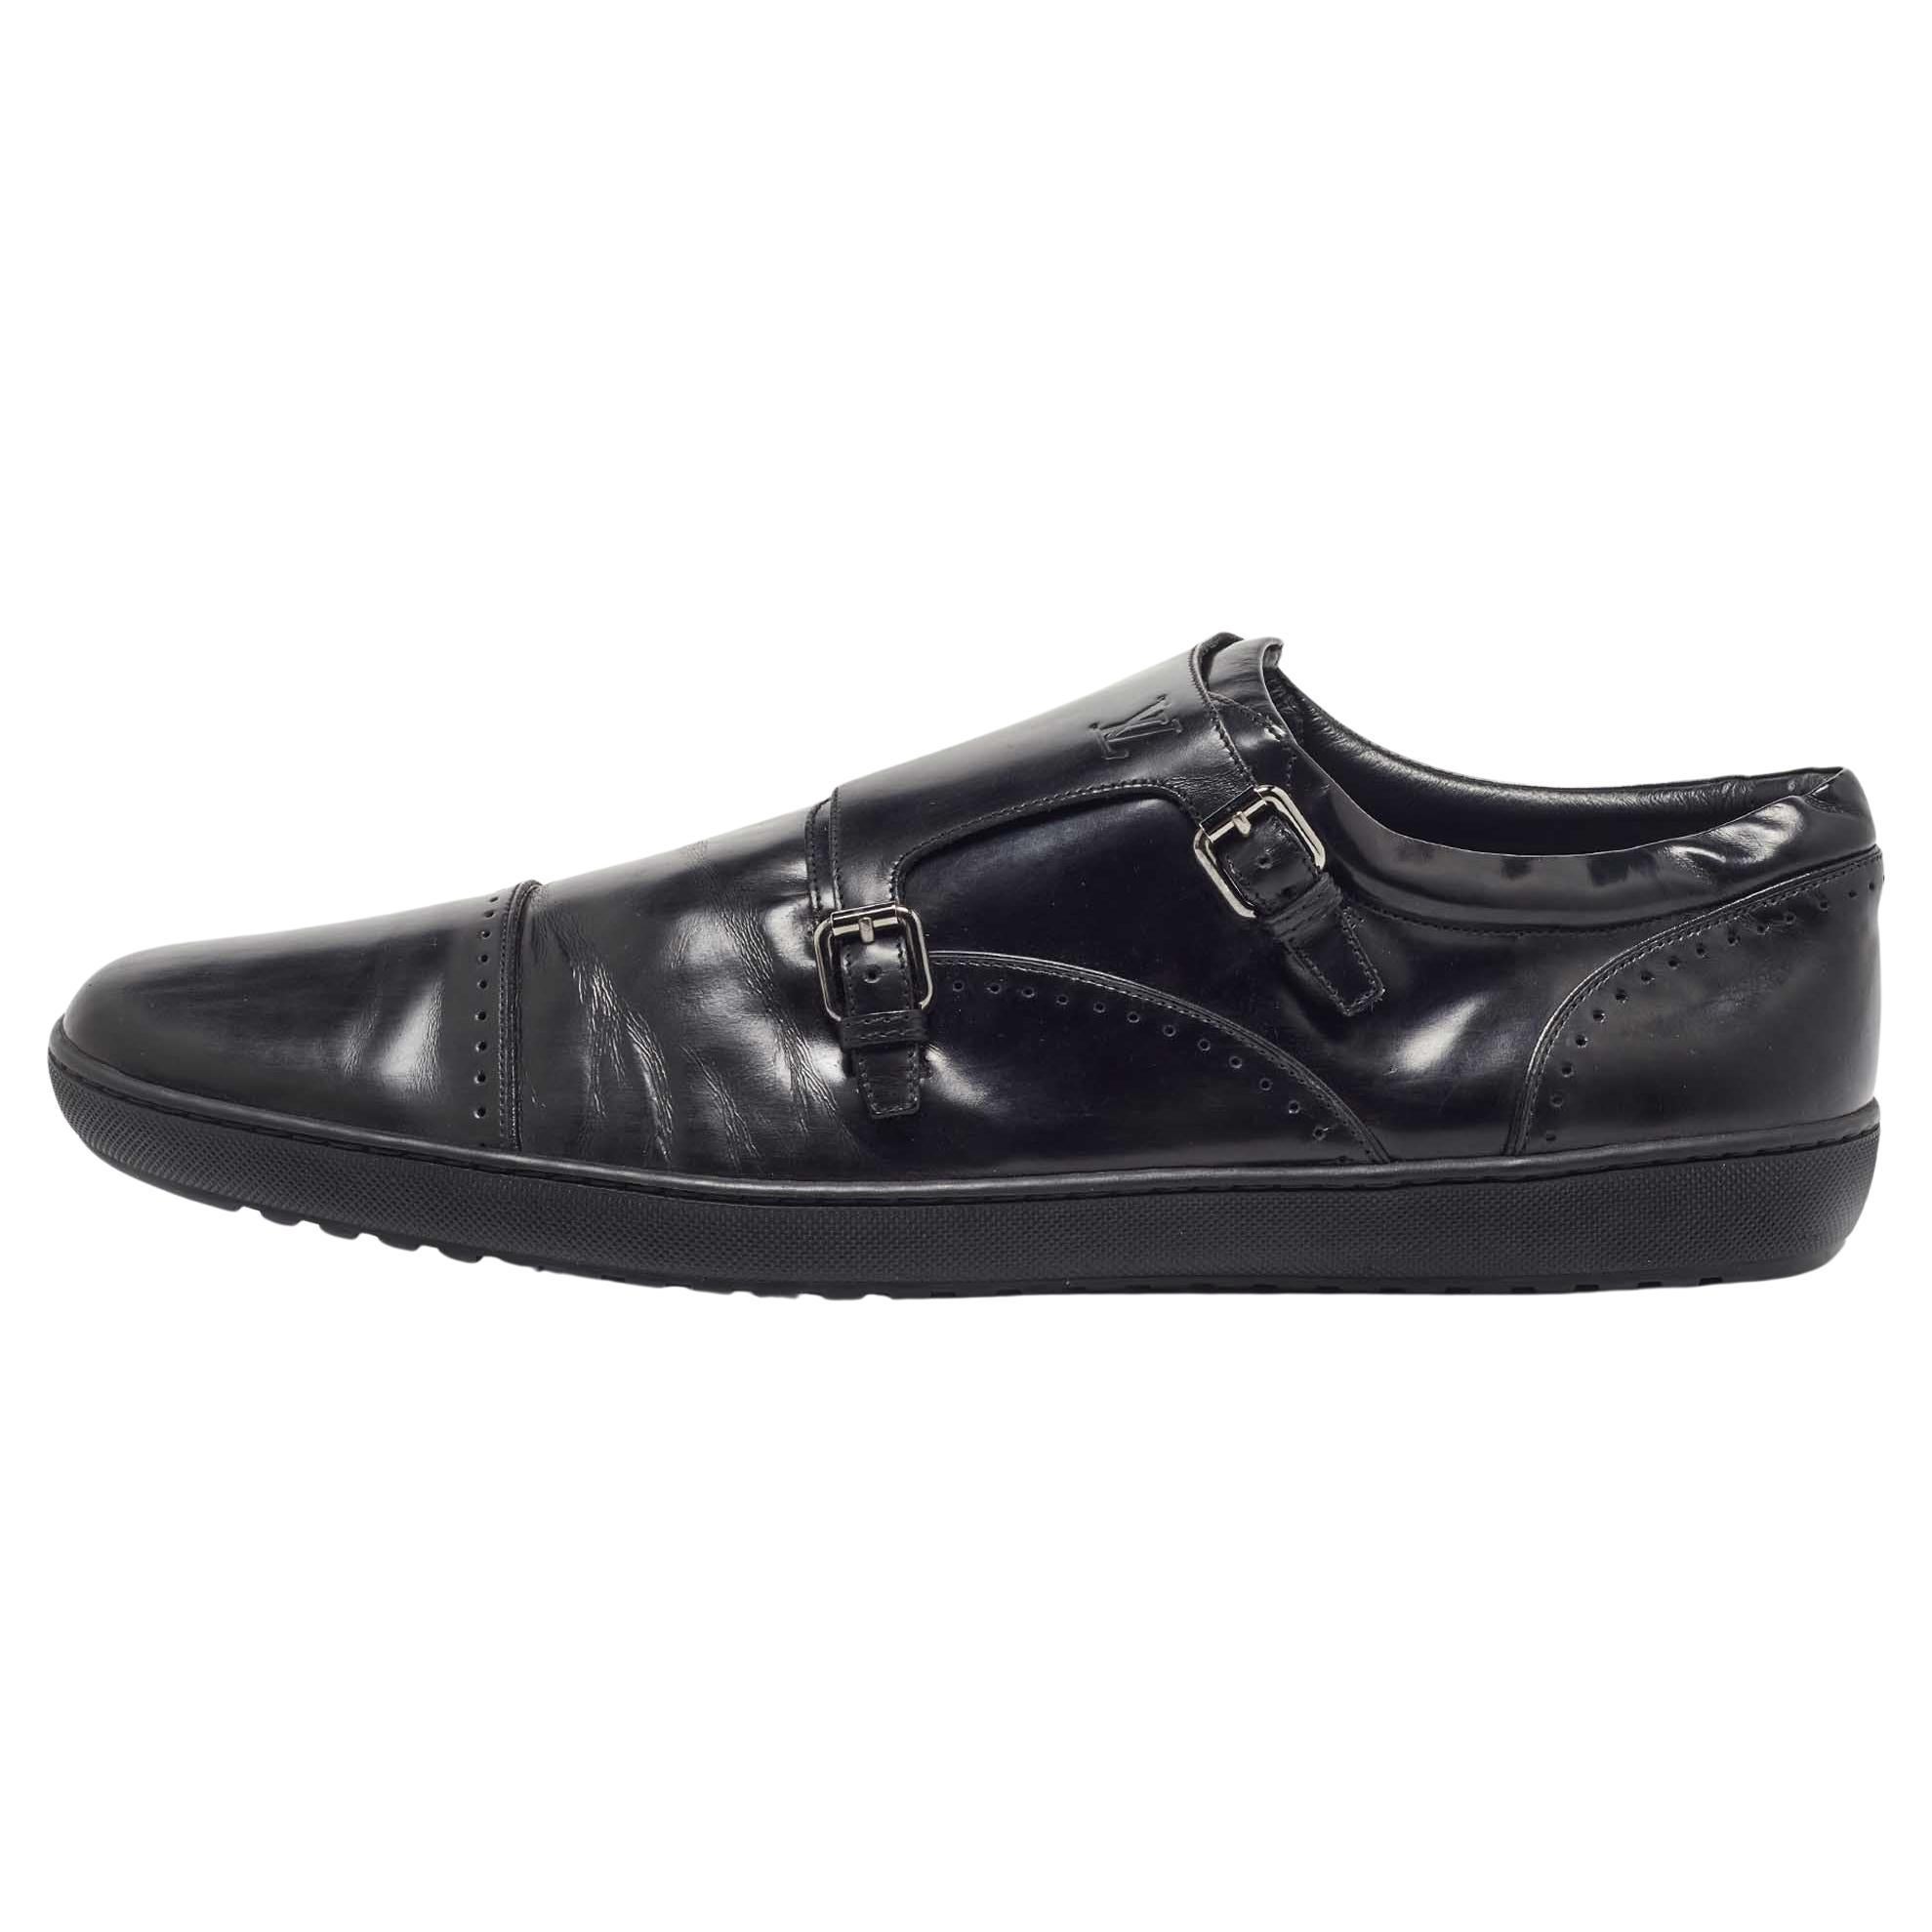 Louis Vuitton Black Leather Monk Strap Loafers Size 46 For Sale